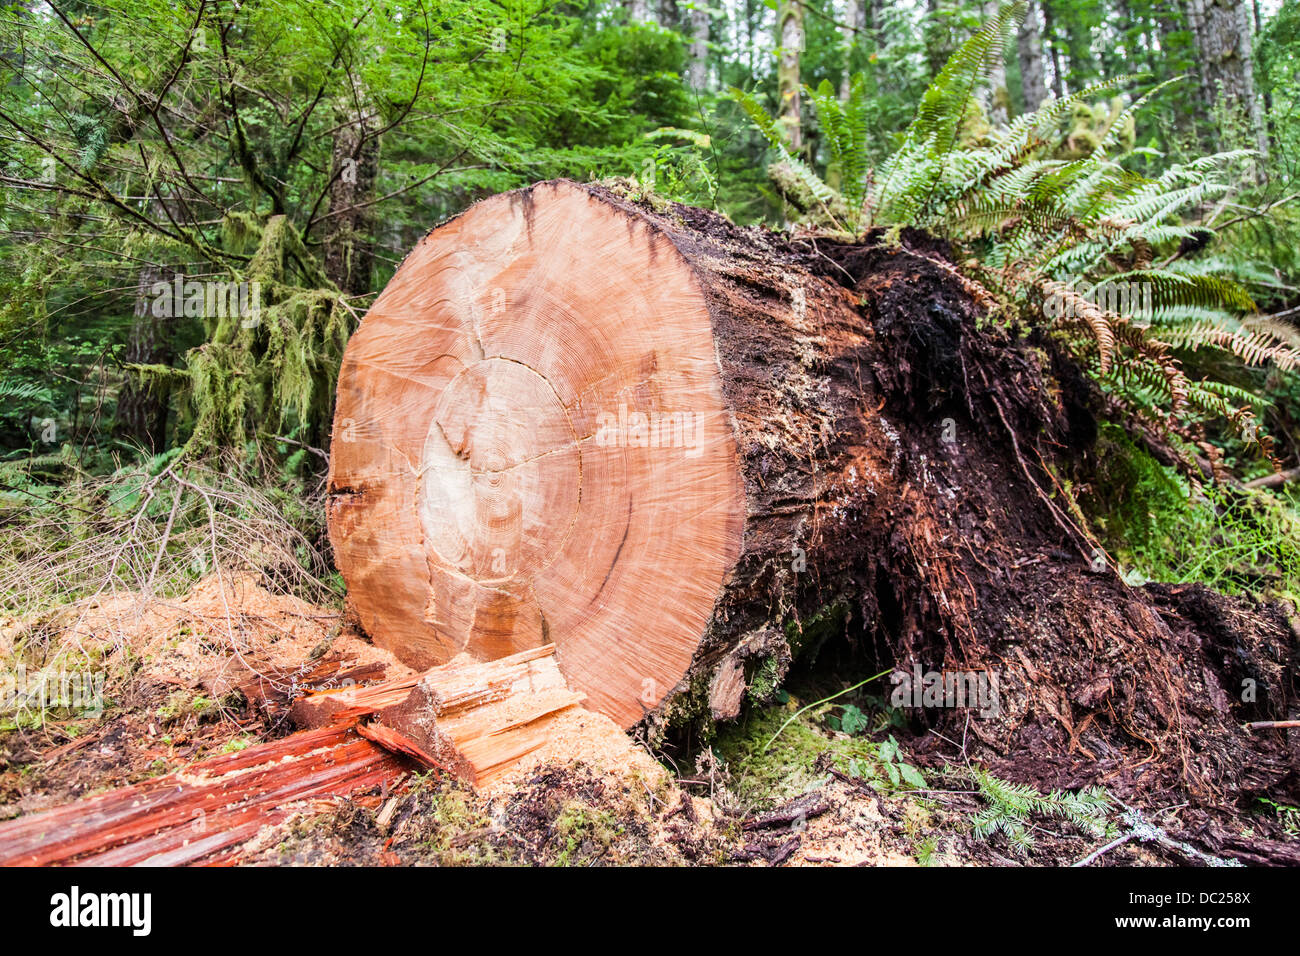 Old growth fir tree several hundred years old uncovered in the forest and cut open. Stock Photo